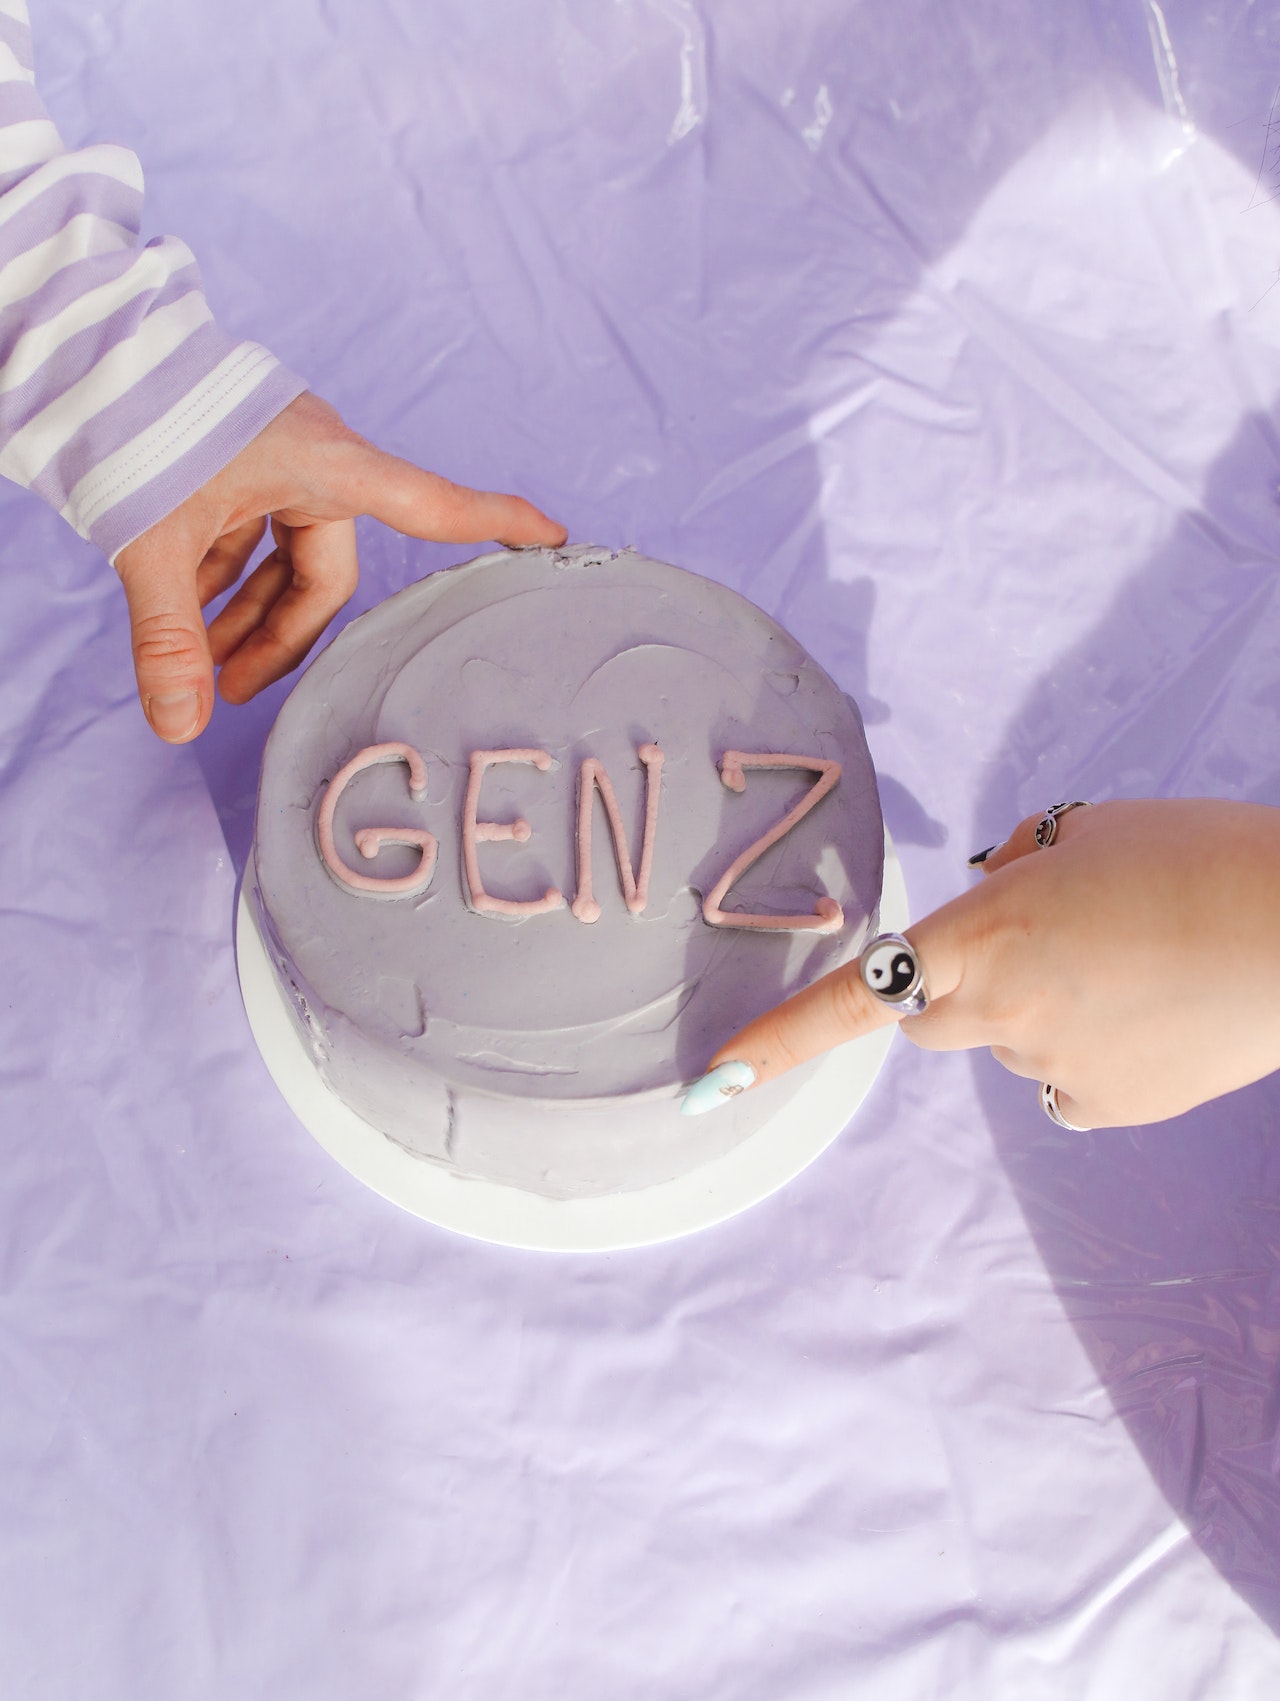 How to use social media to connect with Gen Z audiences